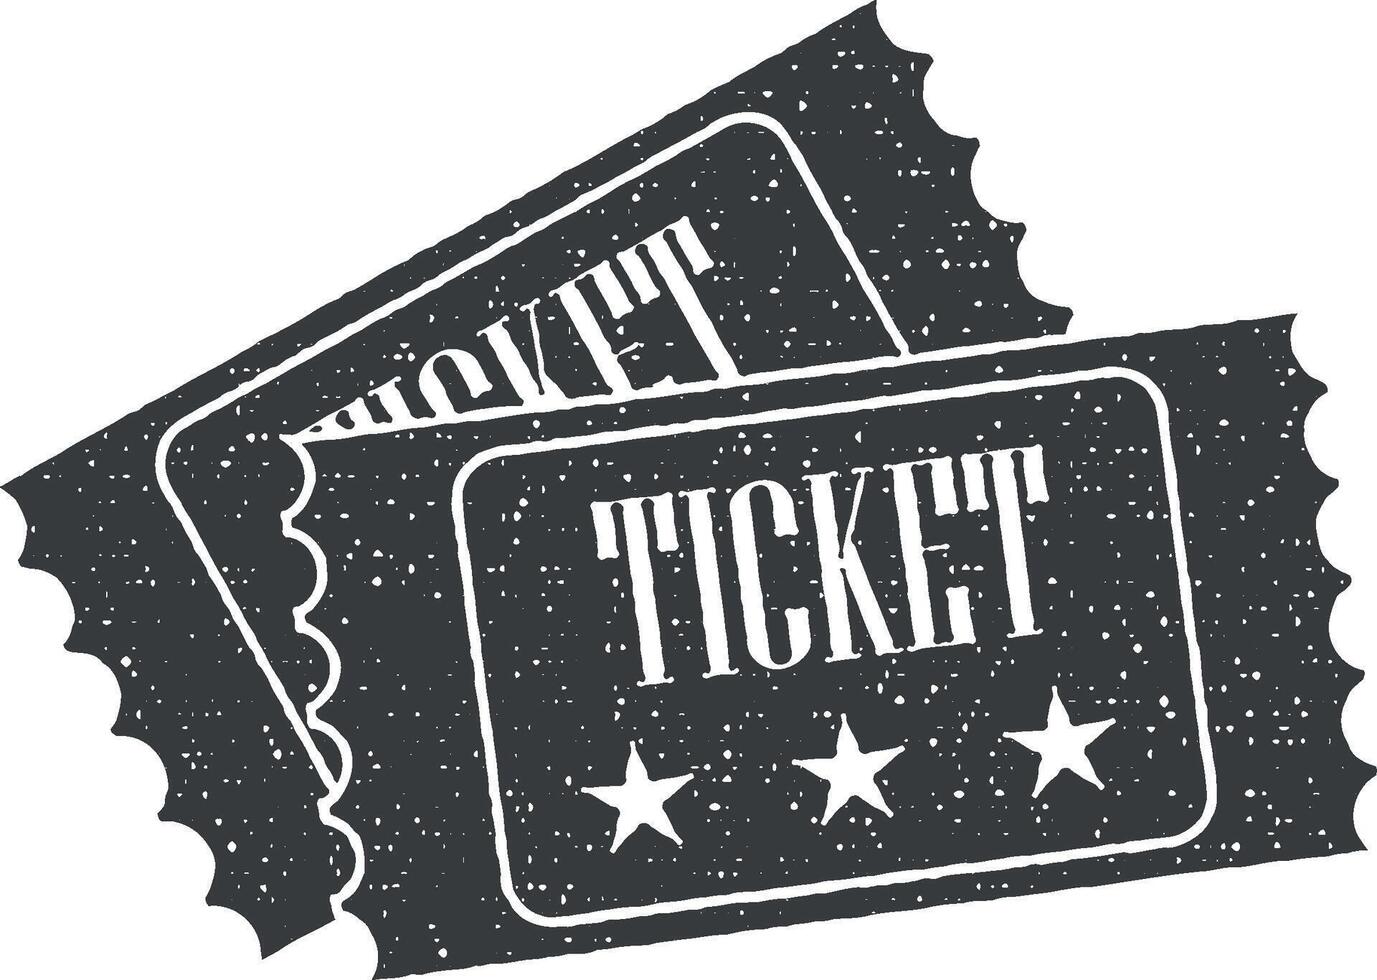 movie tickets vector icon illustration with stamp effect